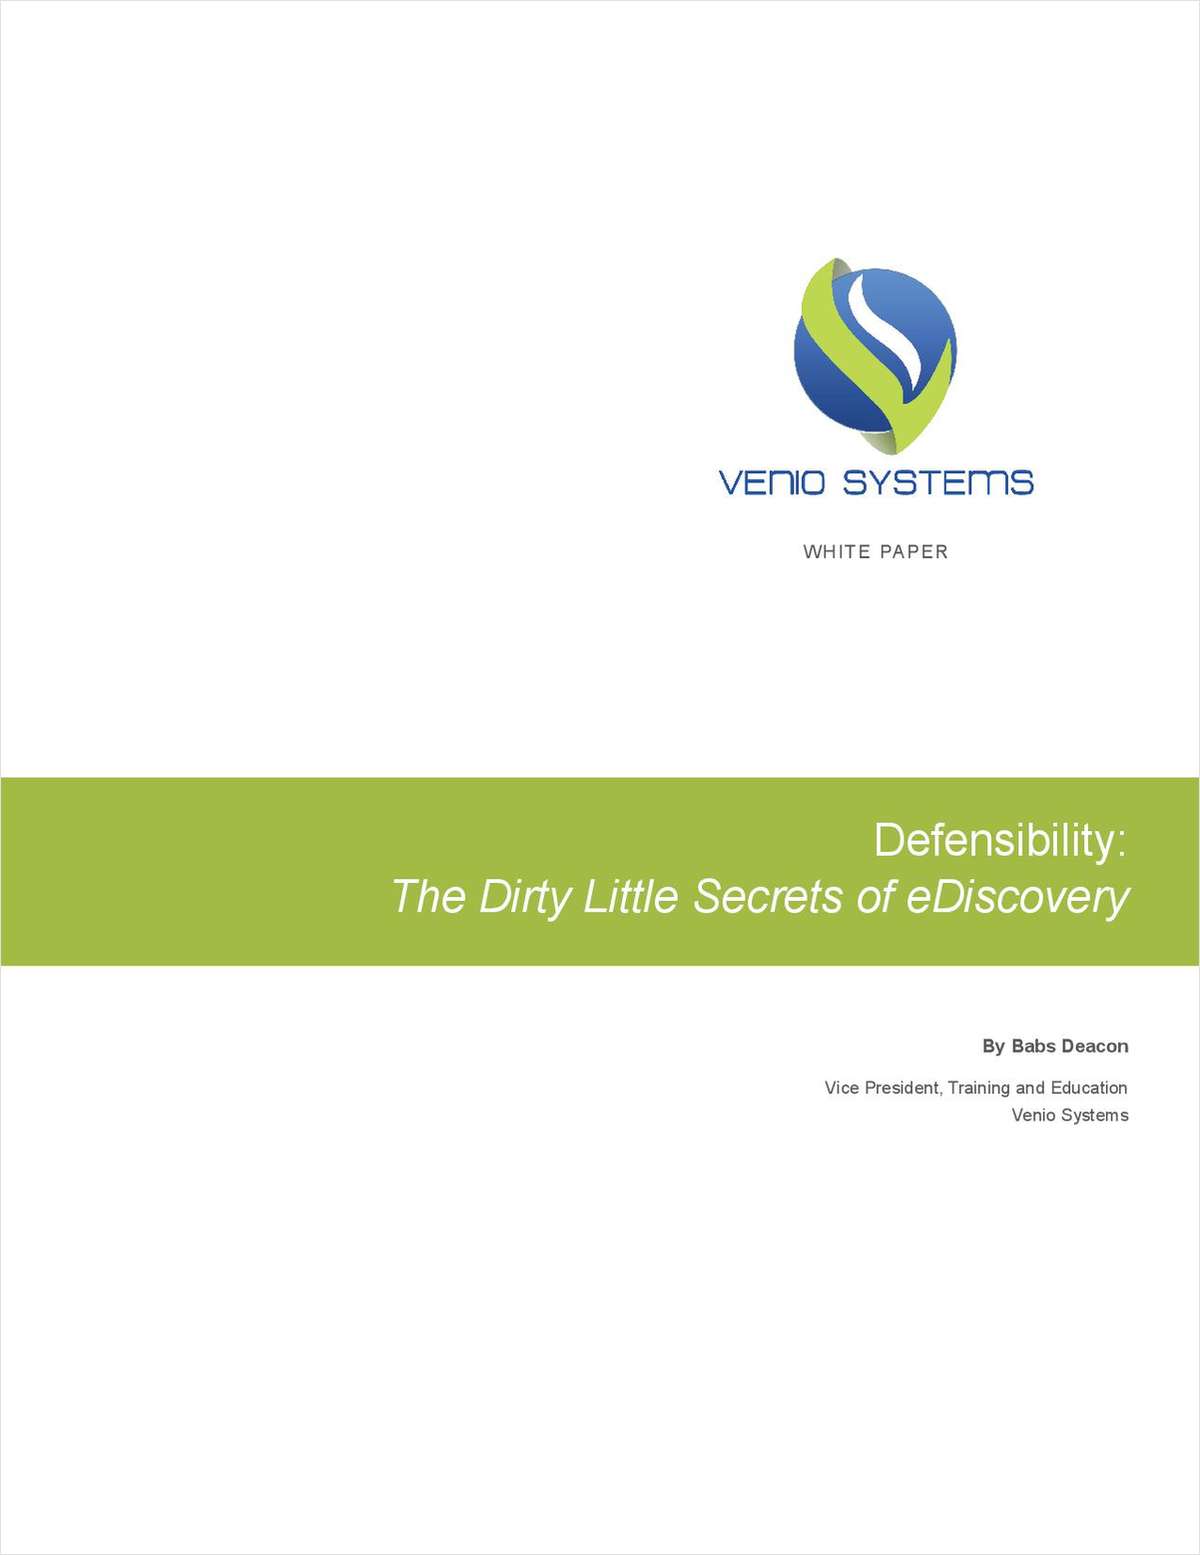 The Dirty Little Secrets of eDiscovery